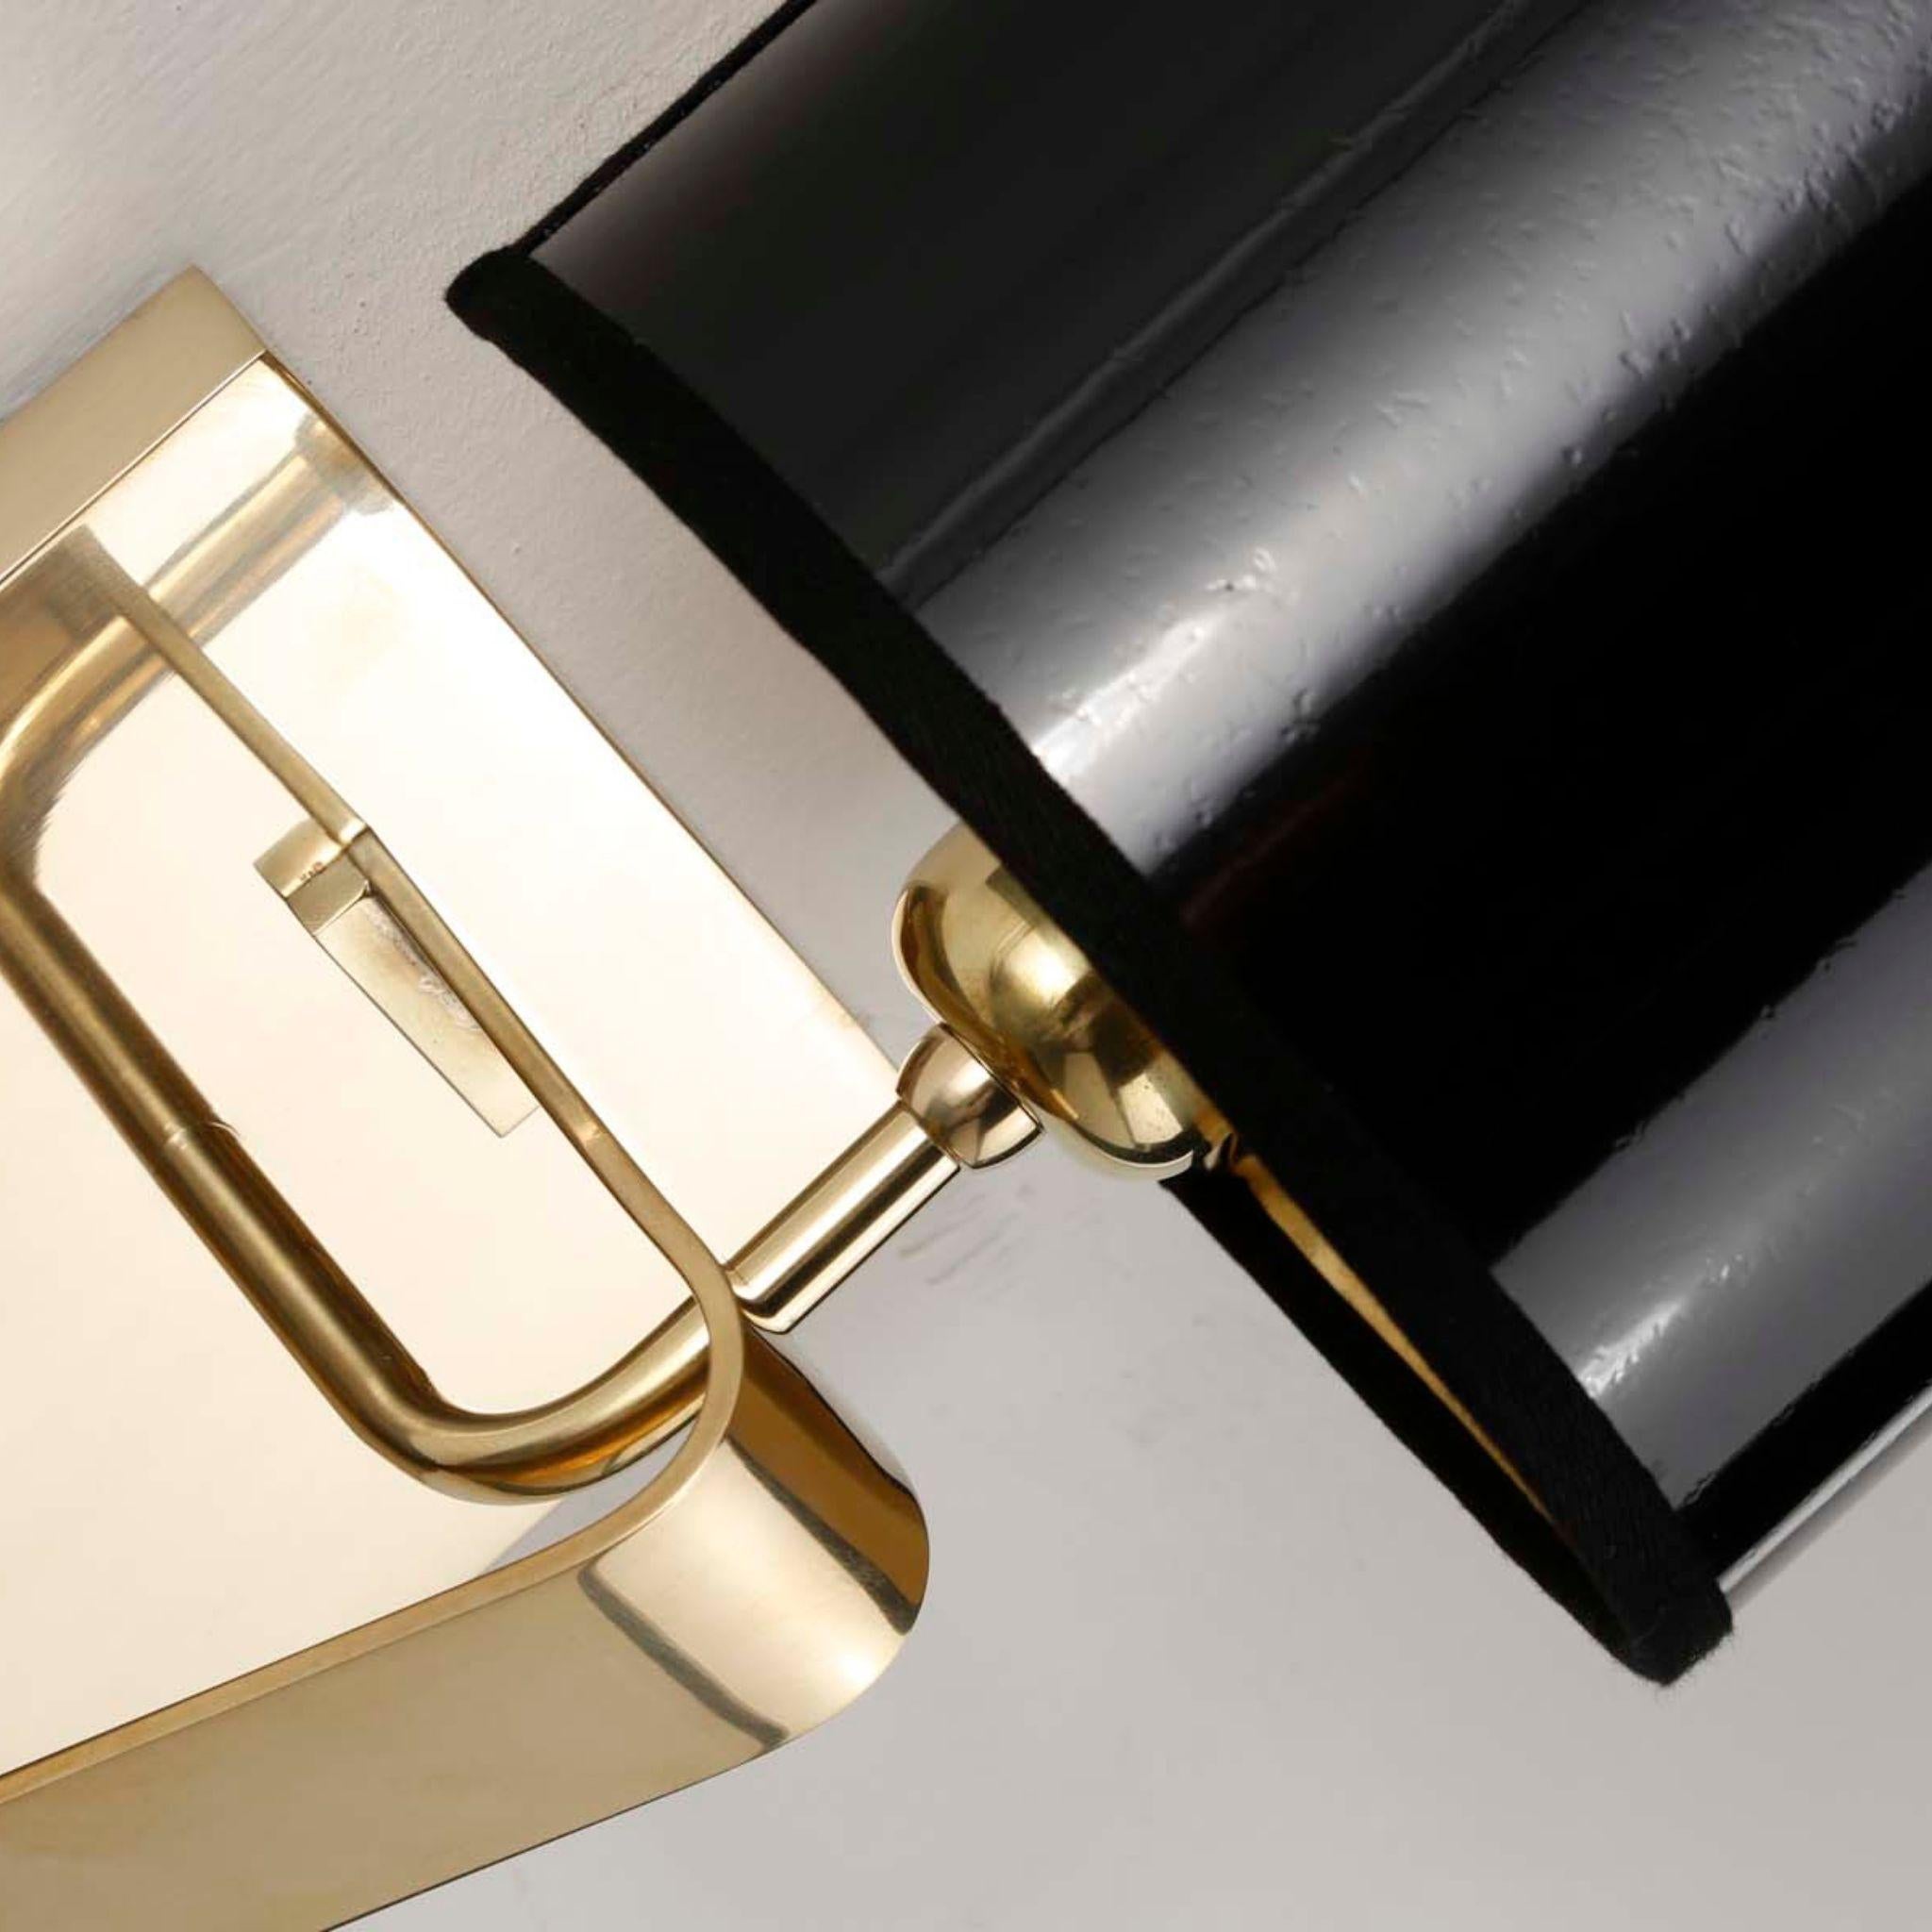 One of the latest in the Timeless applique collection, the Urban 05 has a retro flavor, its rectangular plate and curved brass arm are offered in the satin nickel finish which together with the black PVC lampshade give it an ambivalent nature: very